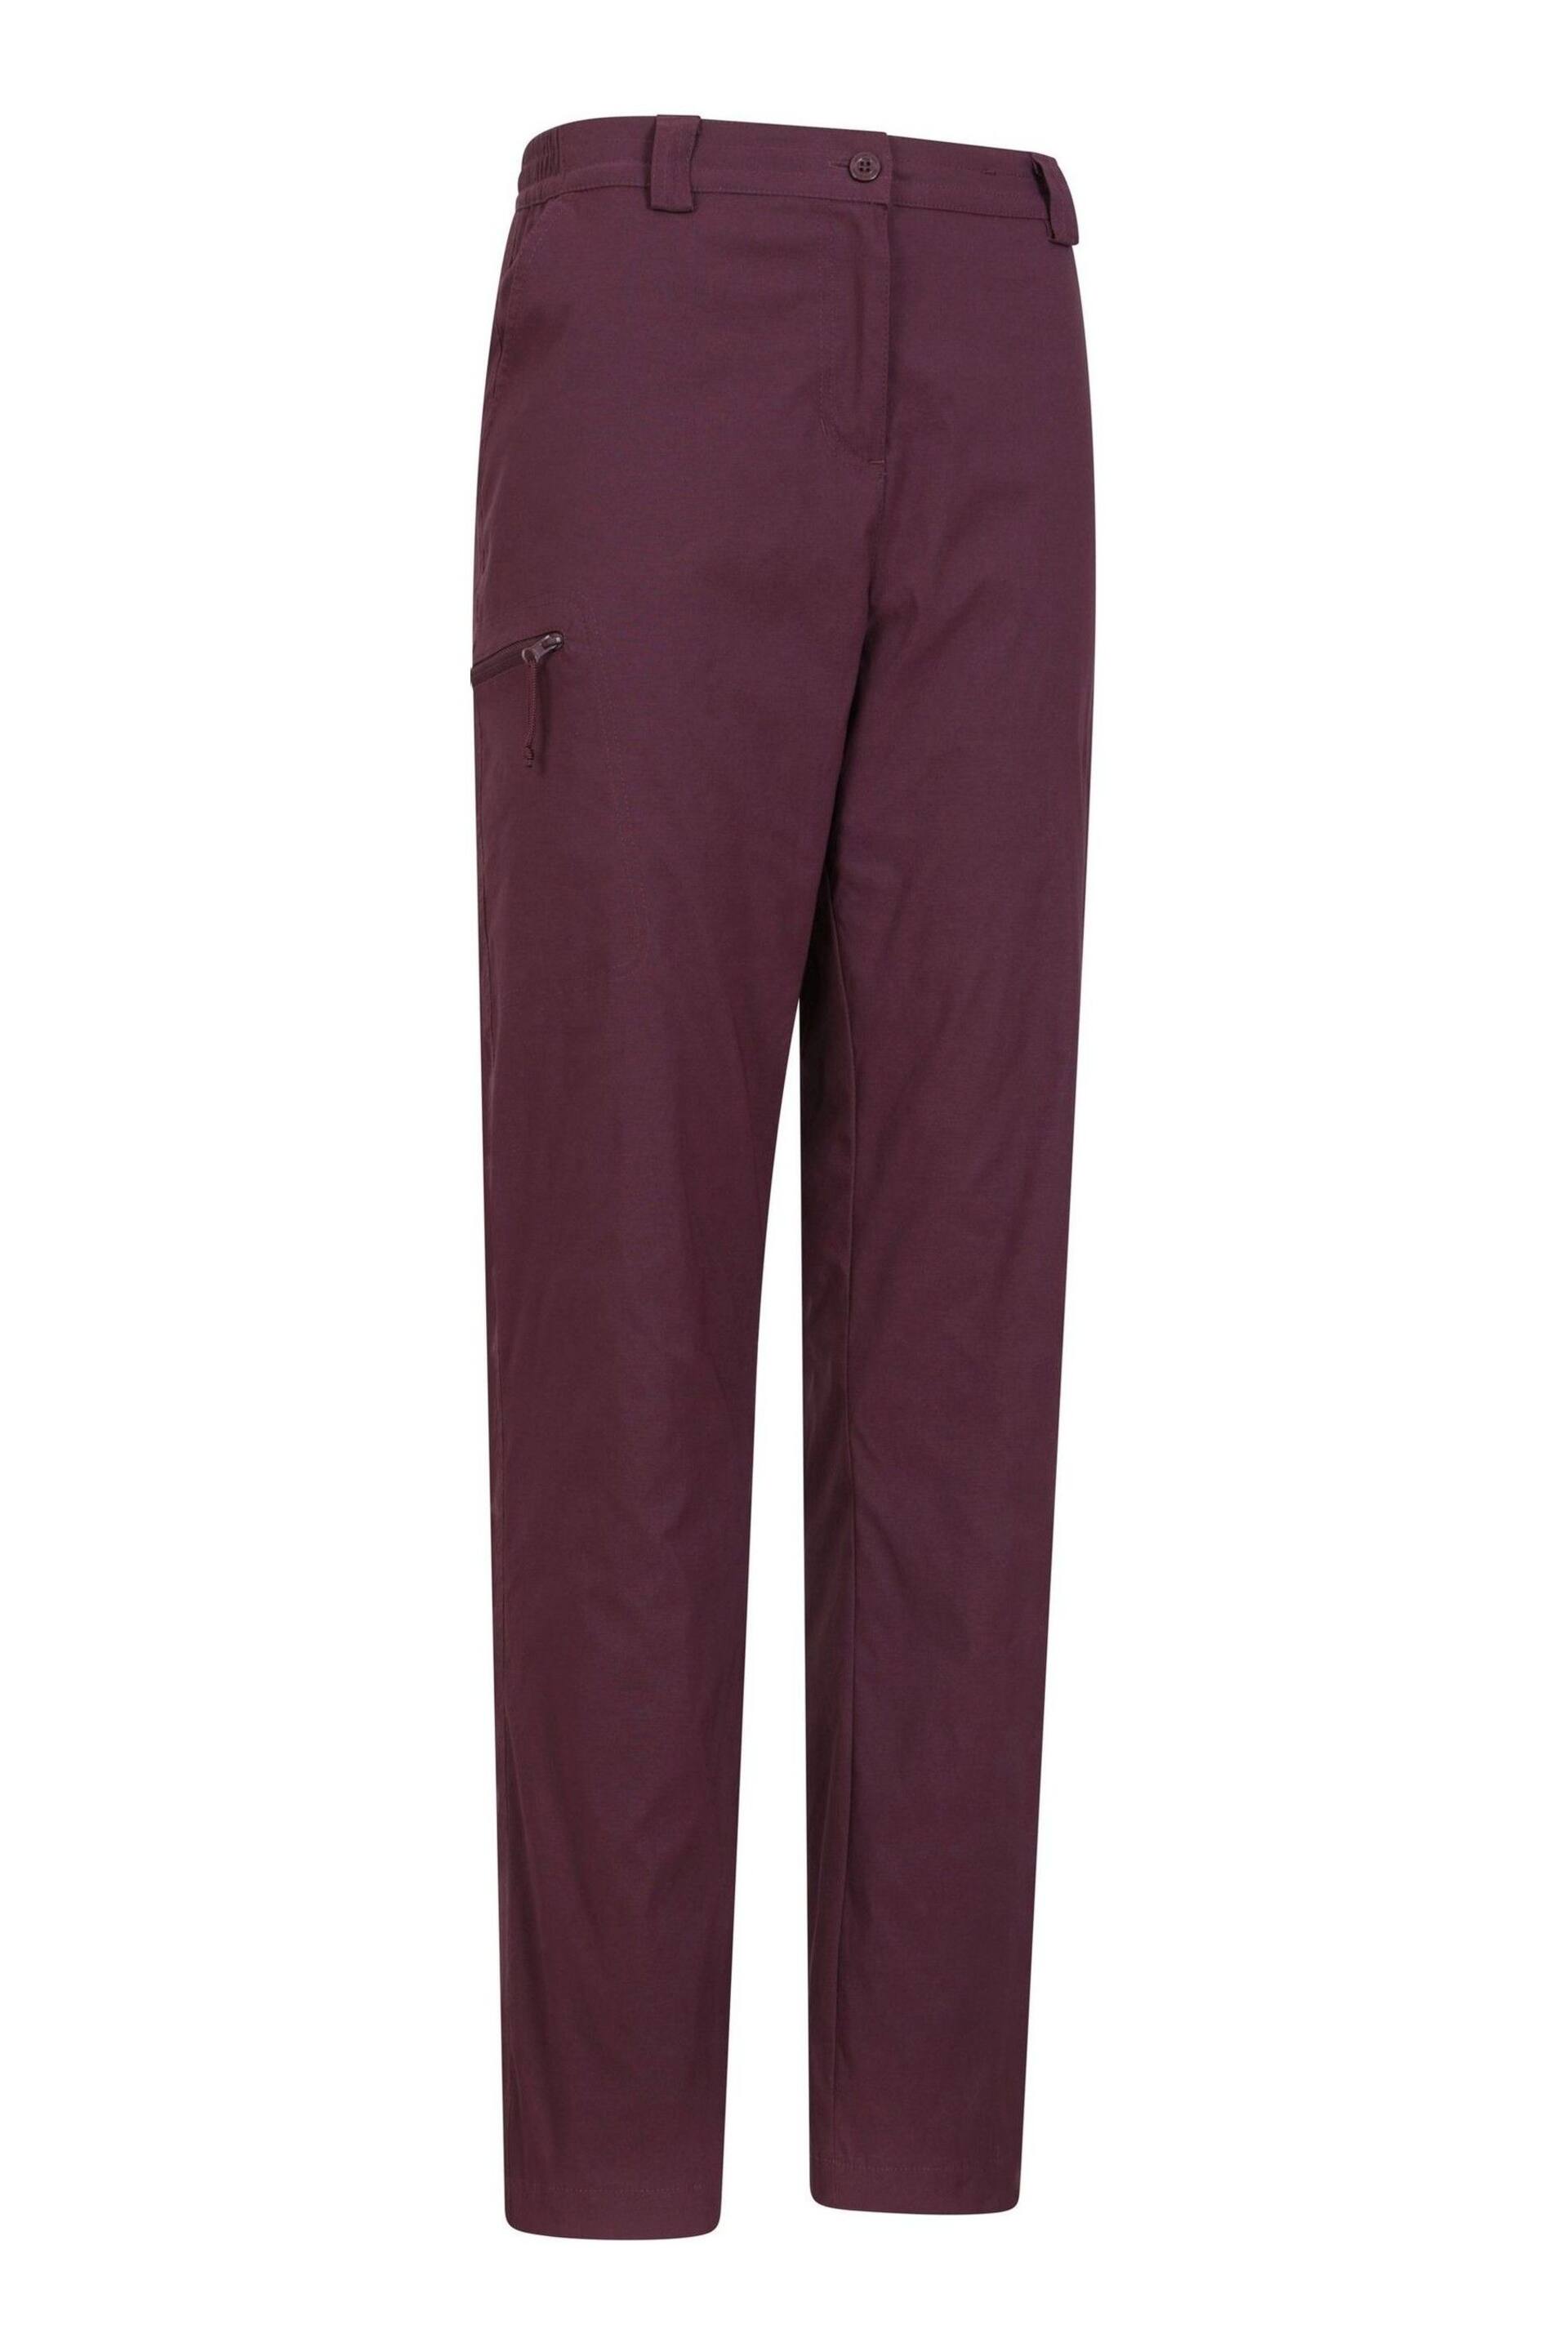 Mountain Warehouse Dark Brown Winter Hiker Stretch Womens Trousers - Image 4 of 5